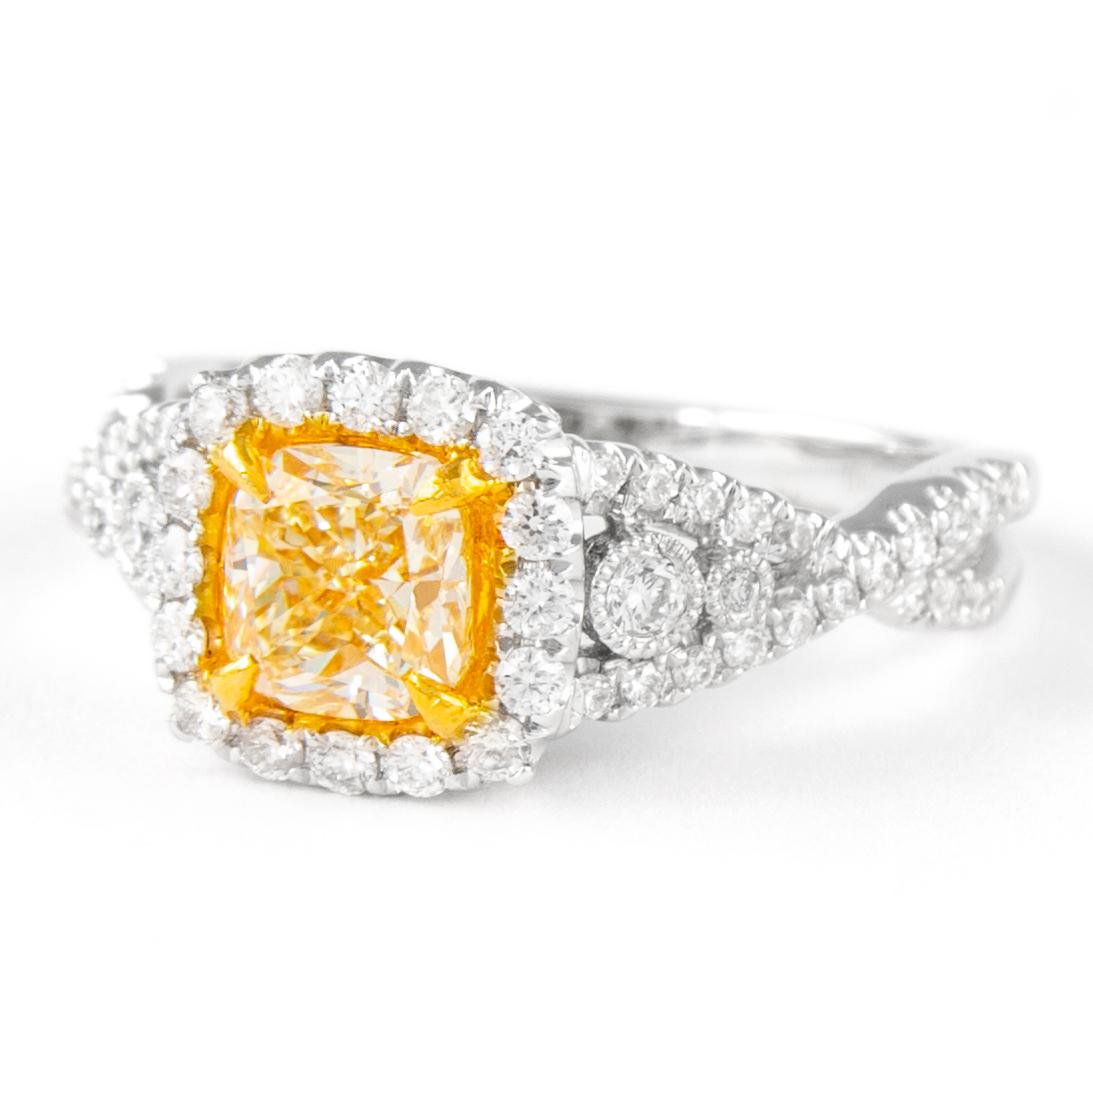 Contemporary Alexander 1.50ctt Fancy Yellow VS2 Cushion Diamond with Halo Ring 18k Two Tone For Sale